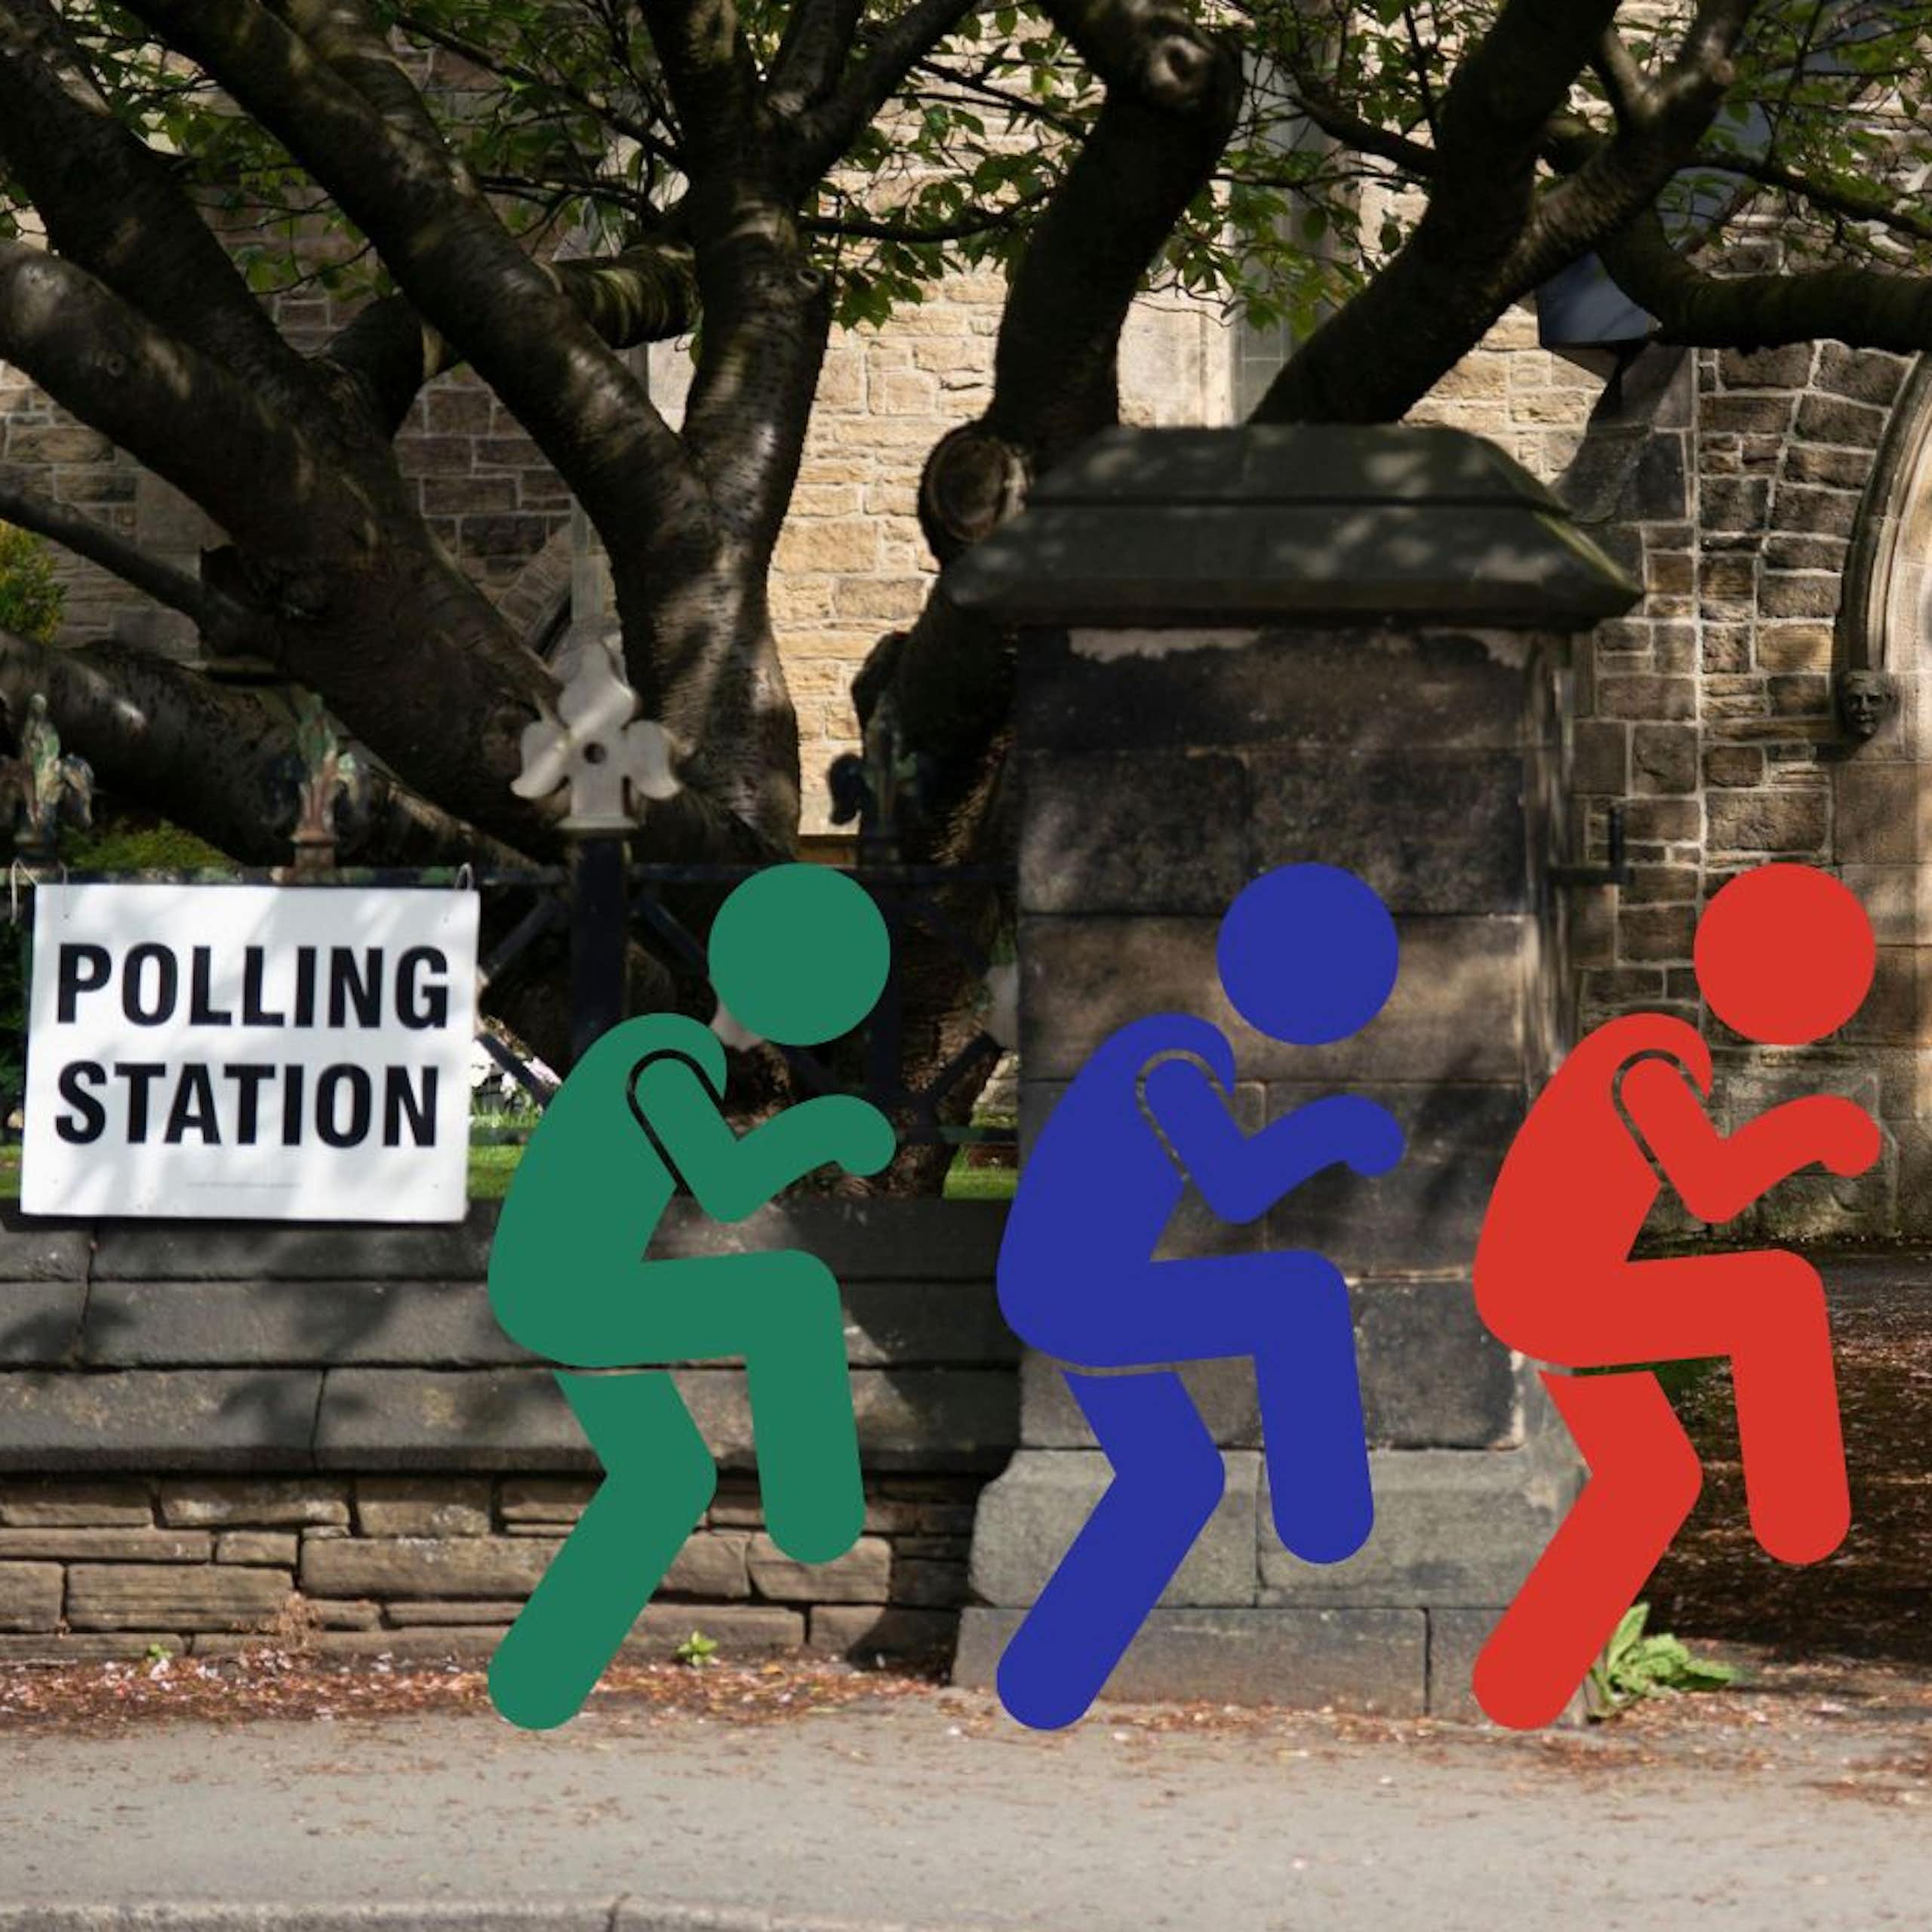 Five figures in the colours of green, dark blue, red, orange, and light blue, sneak into a polling station.